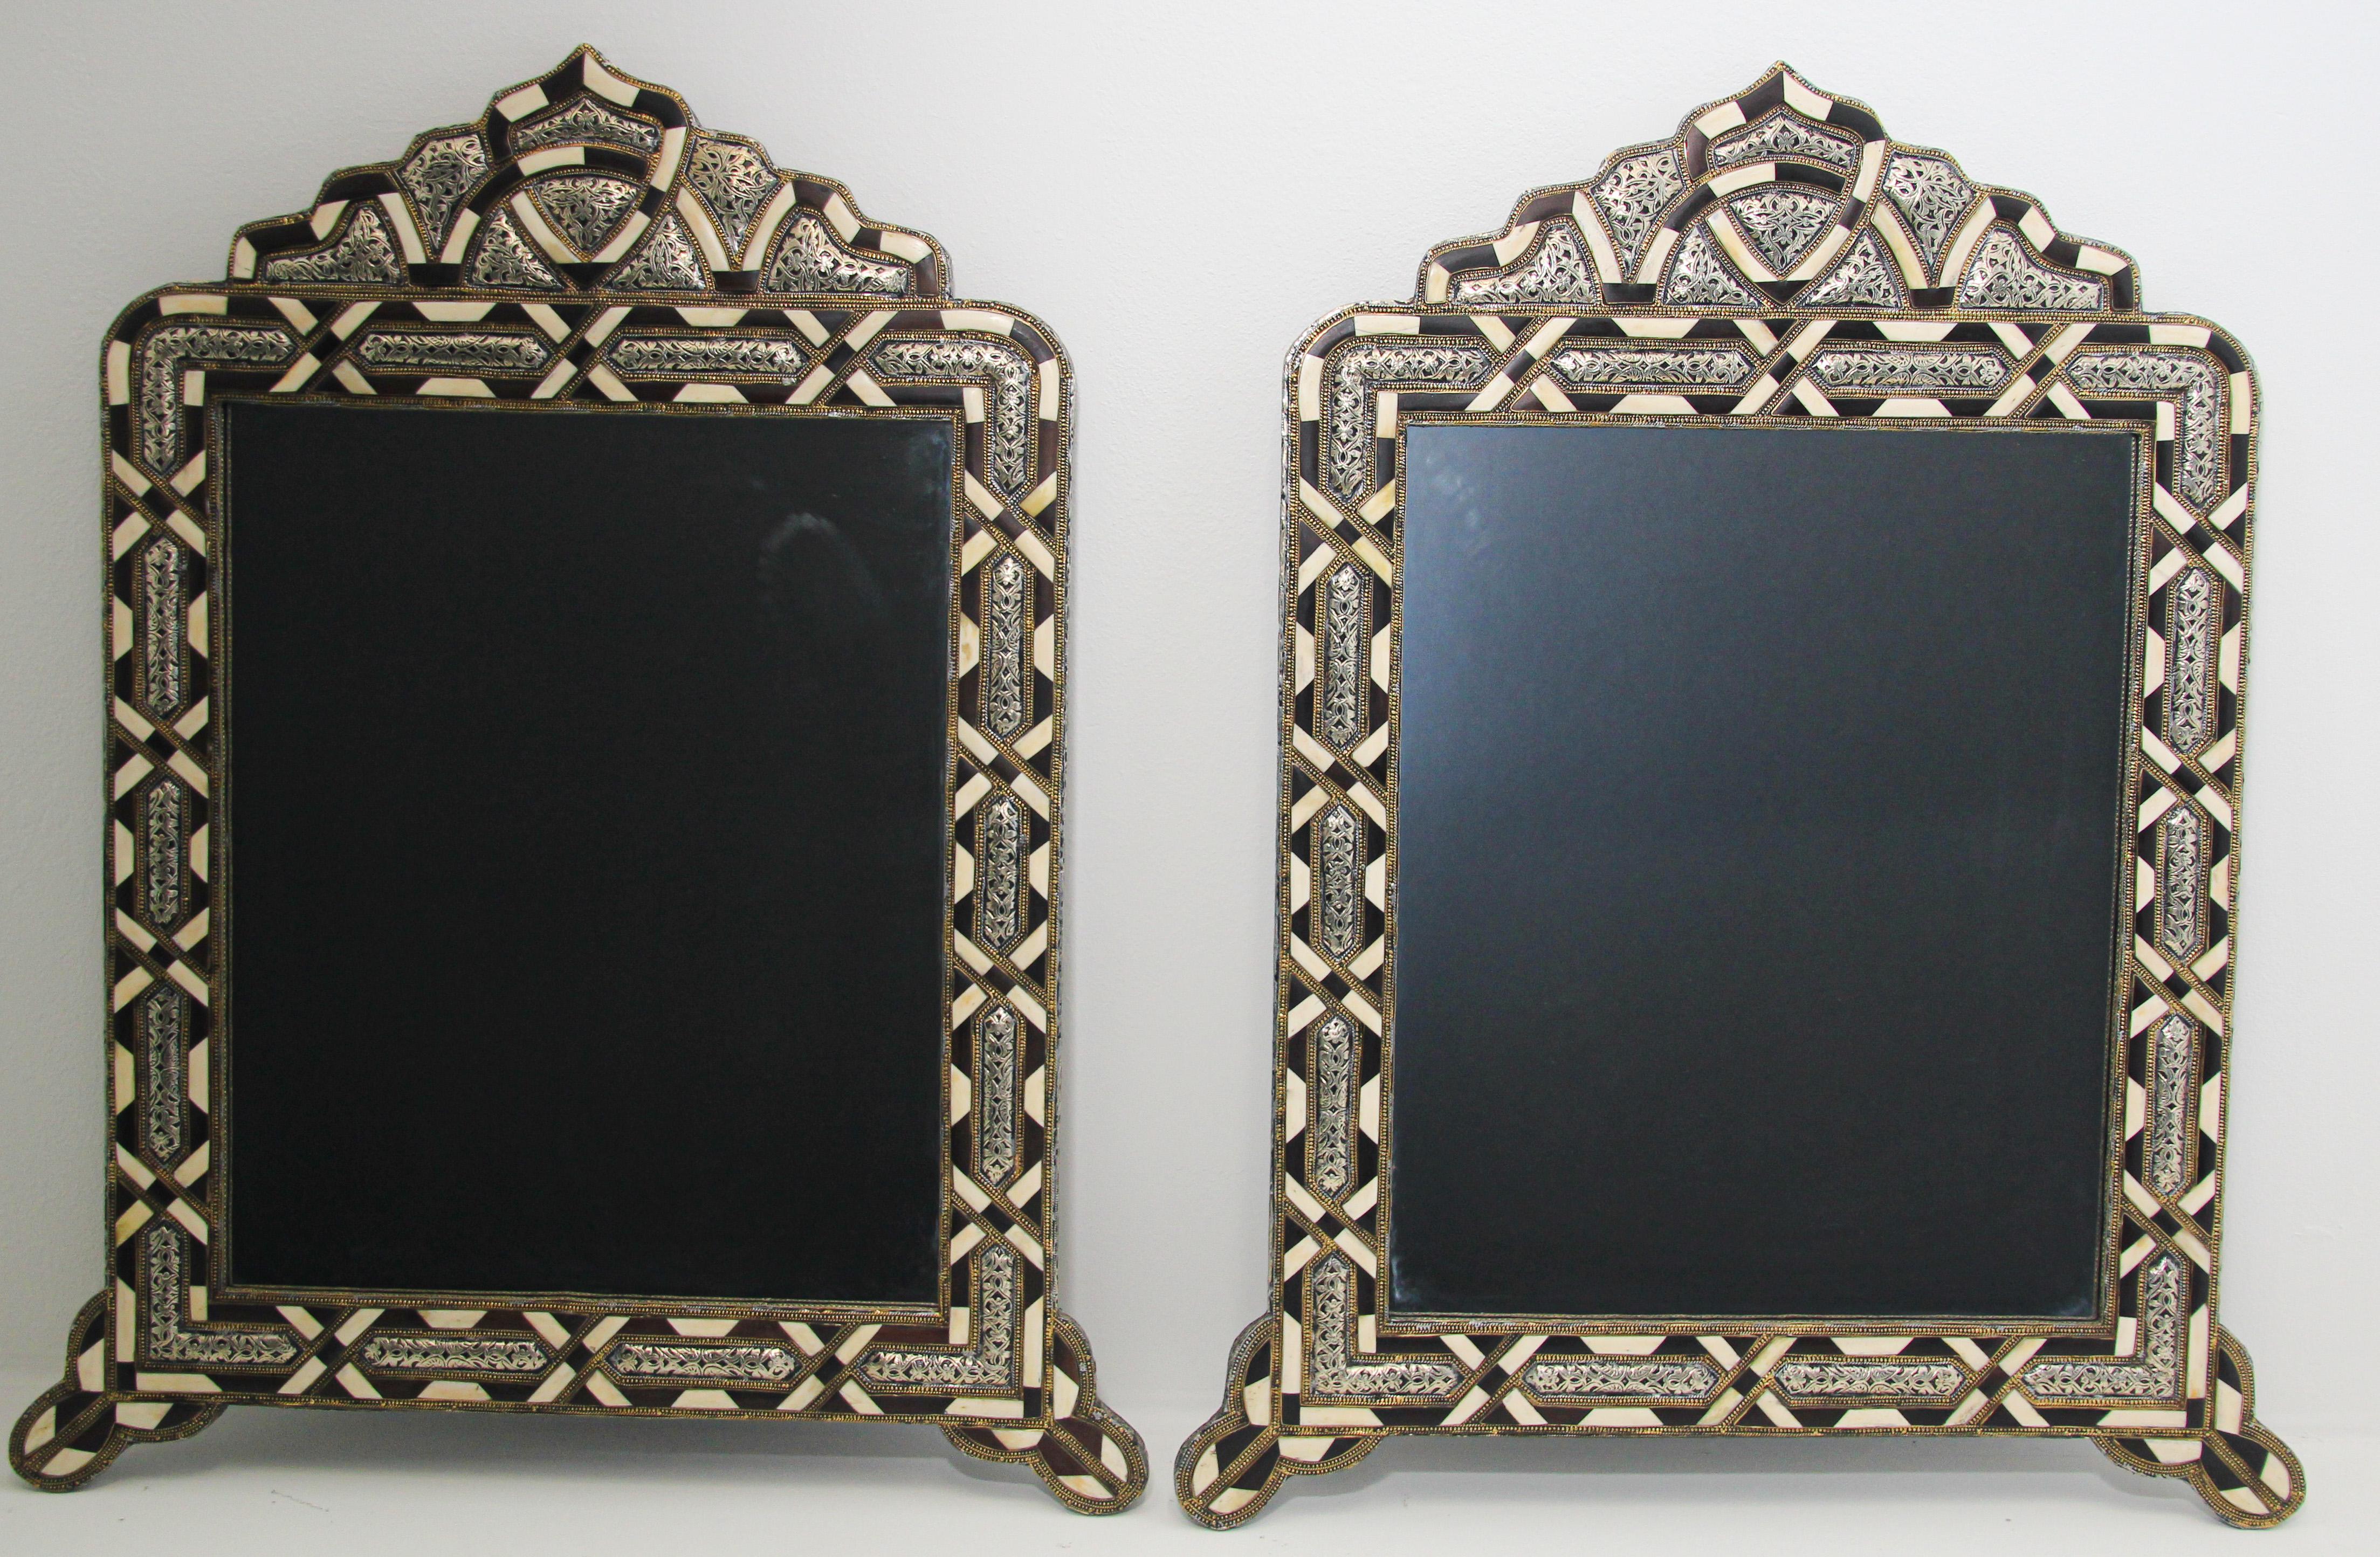 Handcrafted bone and silver arched Moroccan Moorish mirrors.
Elegant rectangular shape wall Moroccan mirror decorated with silvered metal delicately engraved and wood and bone overlay.
Pair of Moroccan mirrors inlaid with camel bone and brass